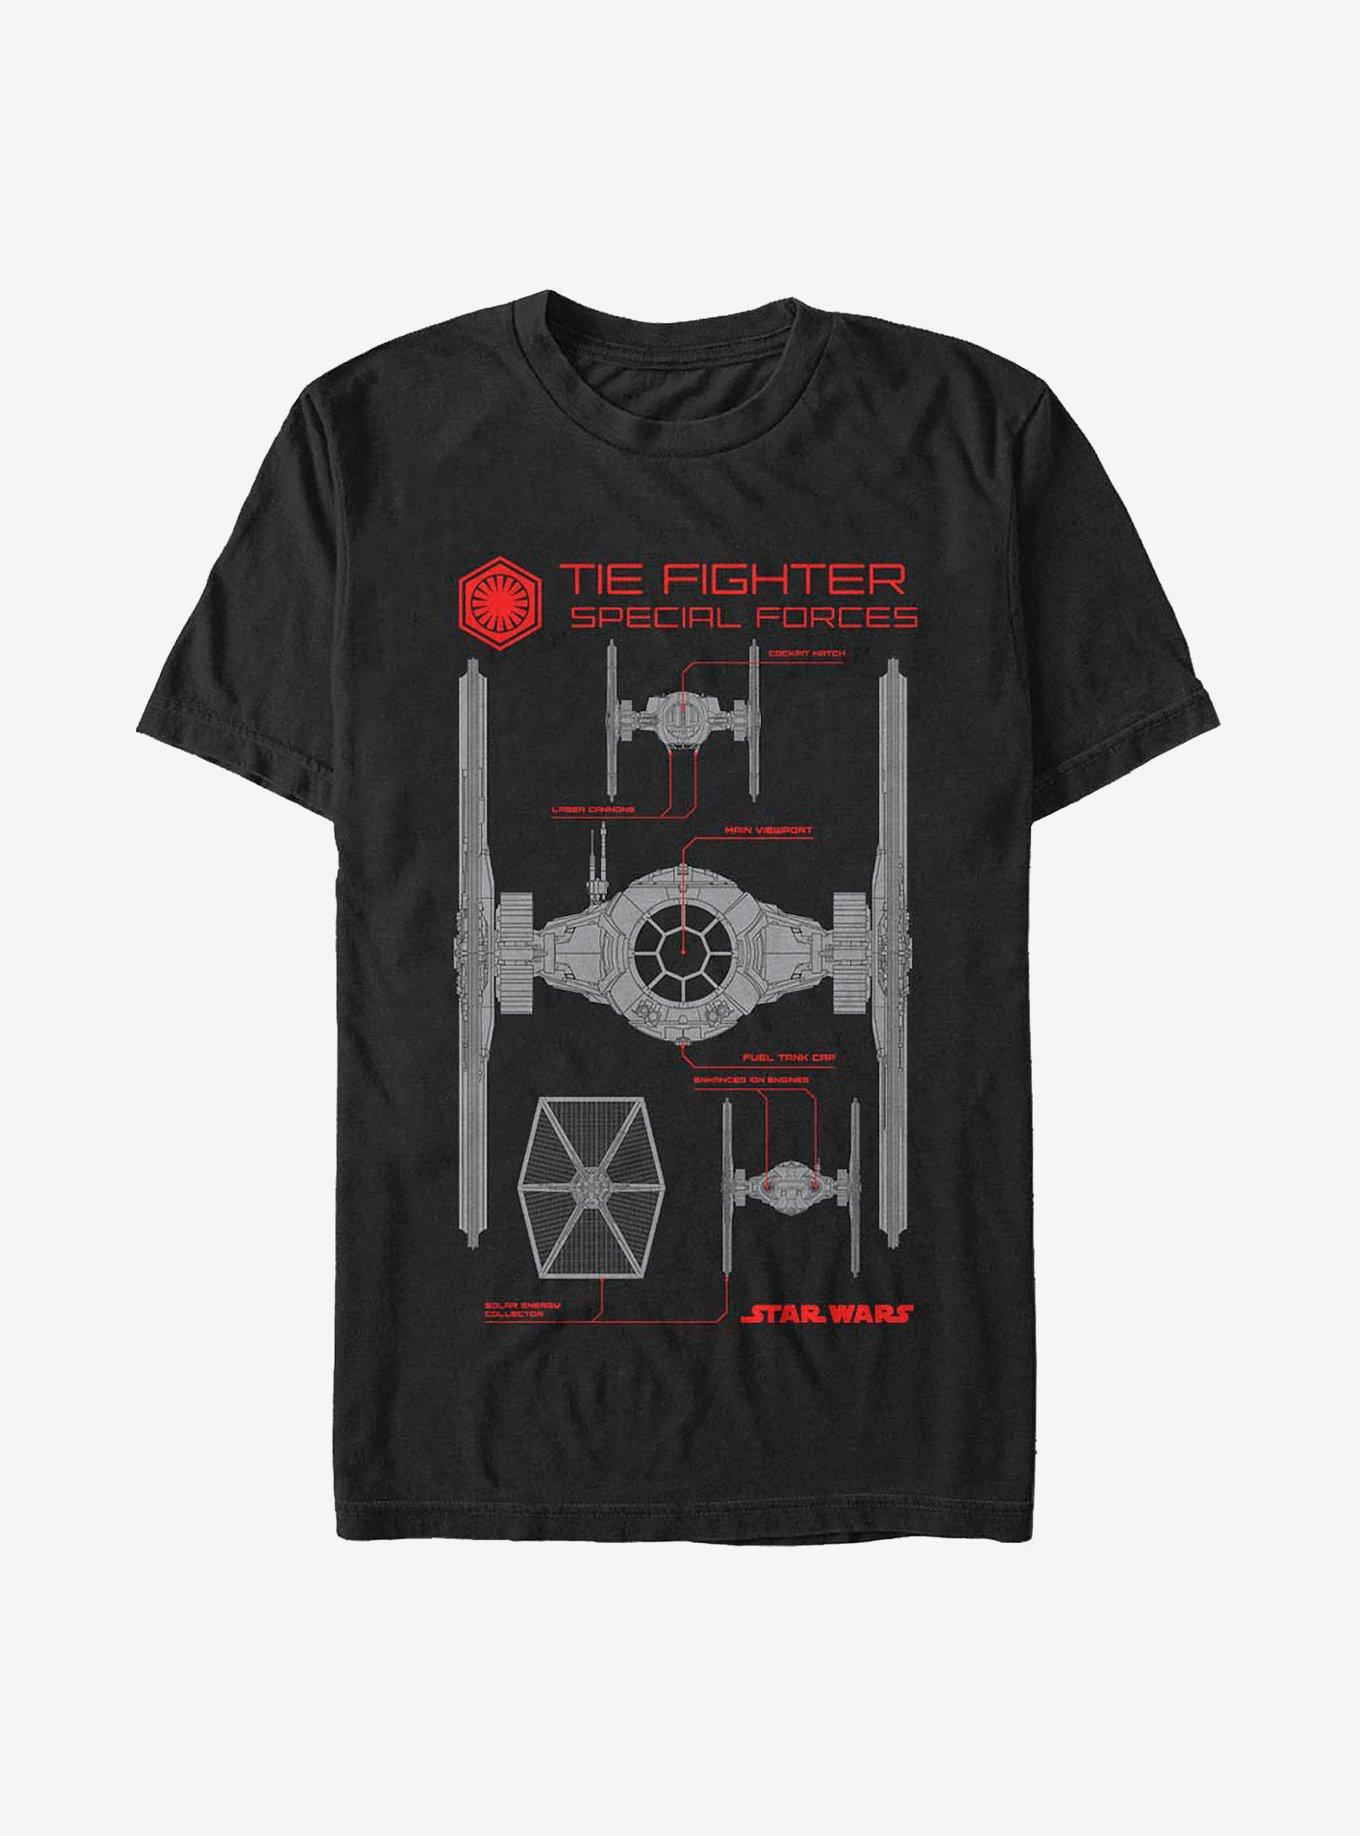 Star Wars: The Force Awakens Tie Fighter Special Forces T-Shirt